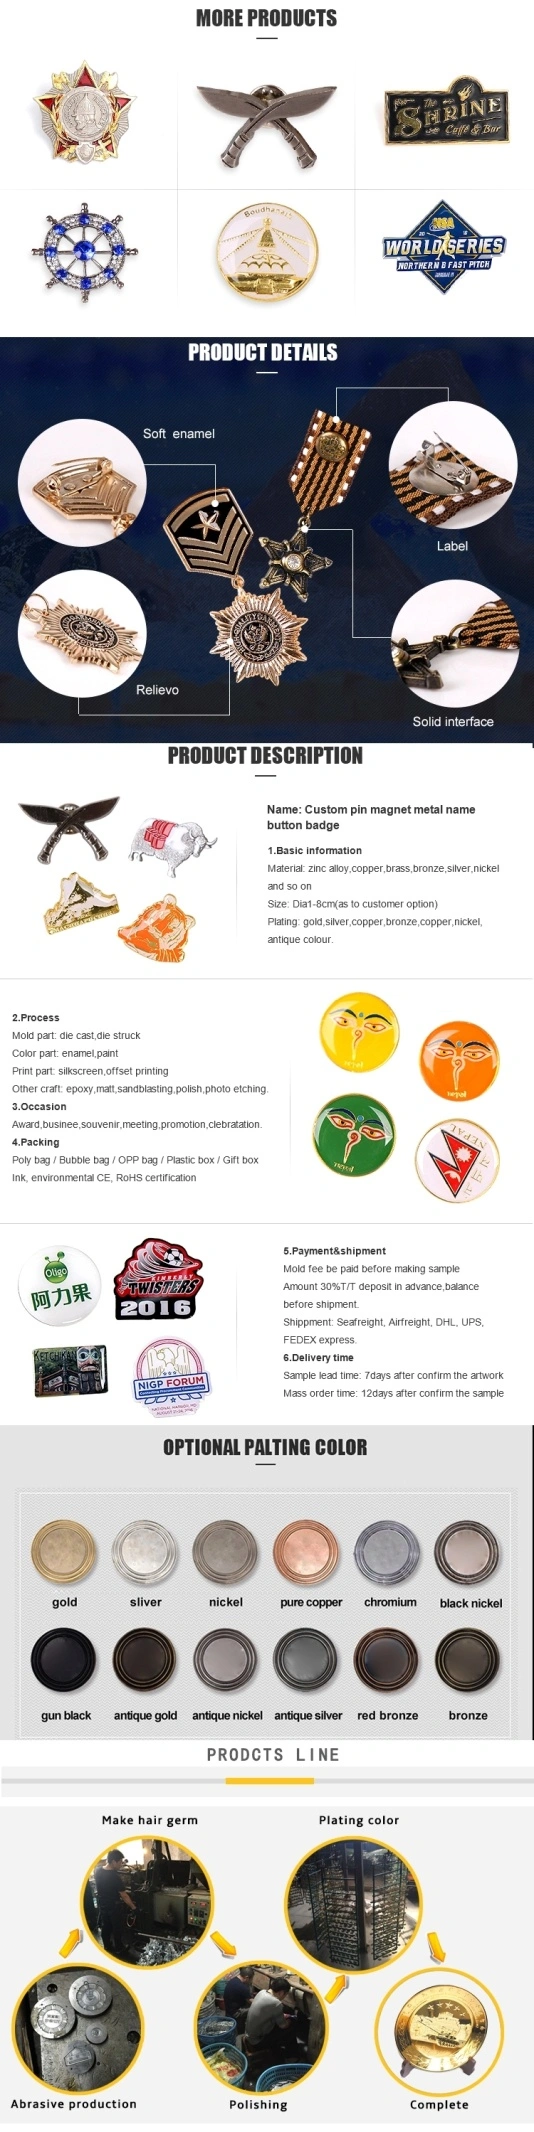 New Products Existing Mould Epoxy Countries Metal Labels Pins Badges